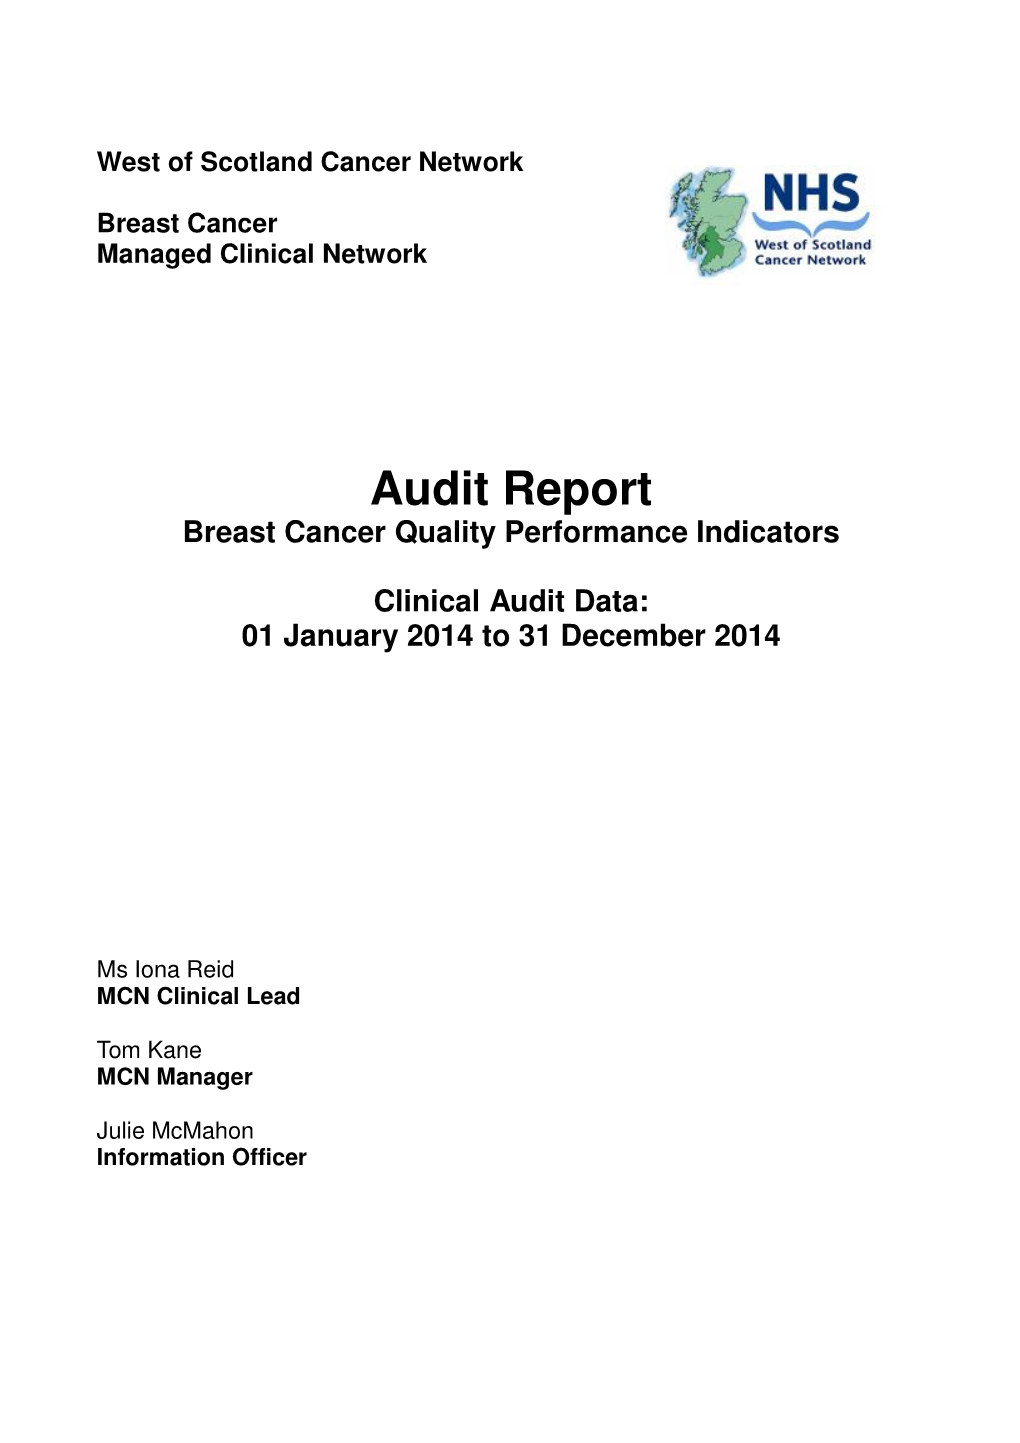 Audit Report Breast Cancer Quality Performance Indicators